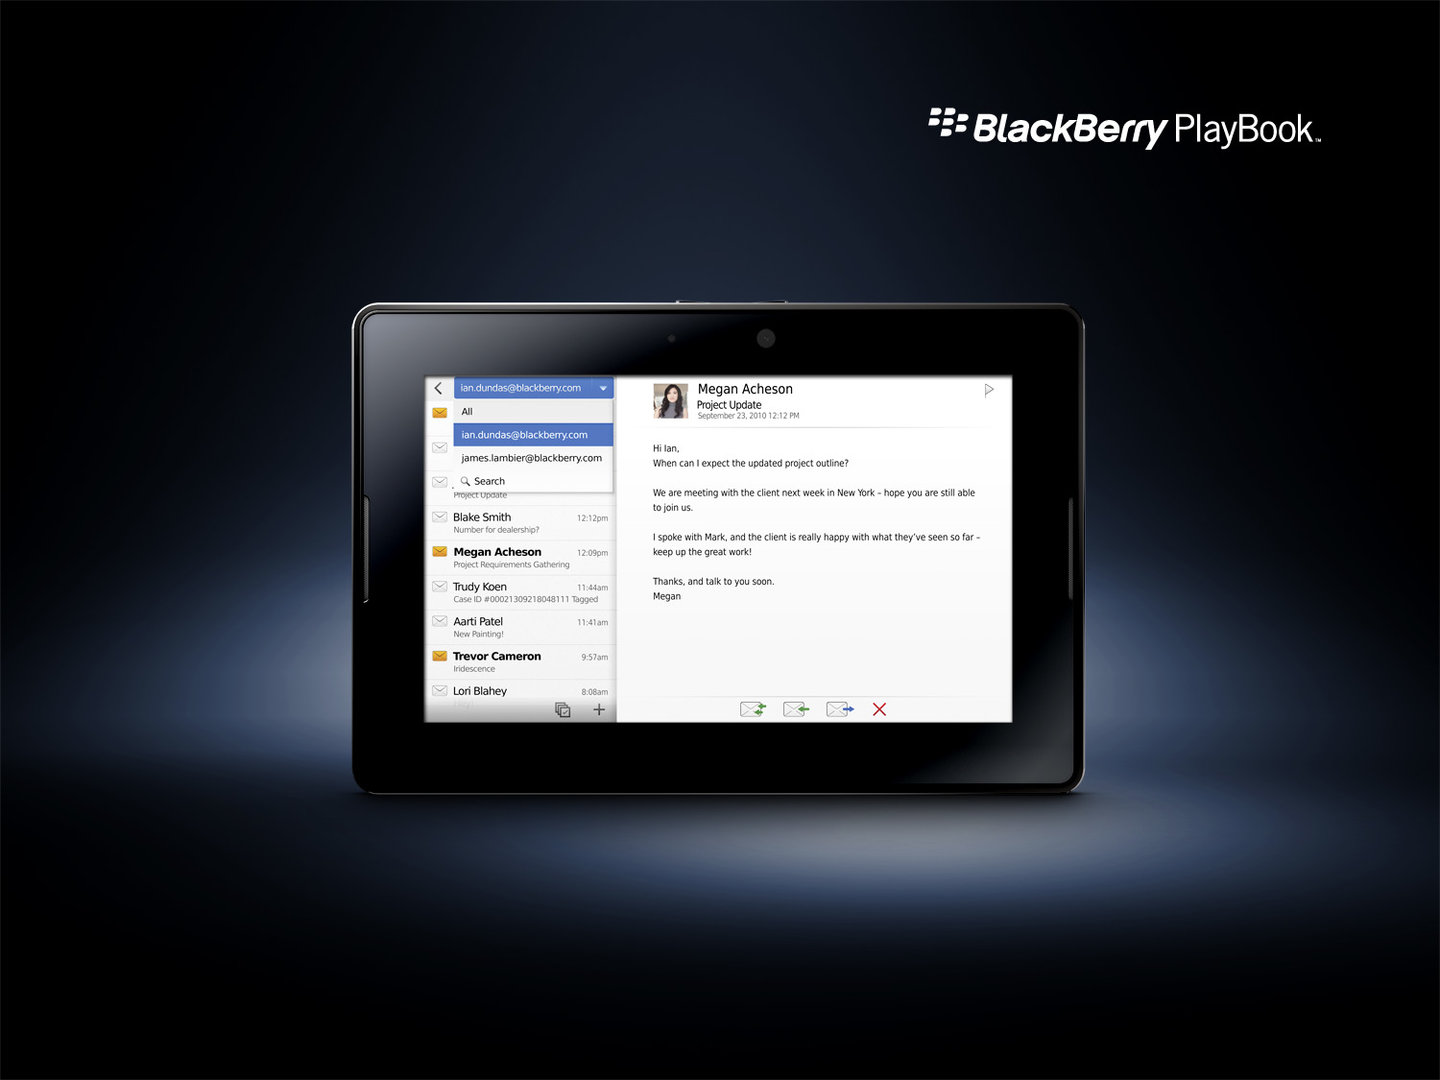 BlackBerry PlayBook: Email